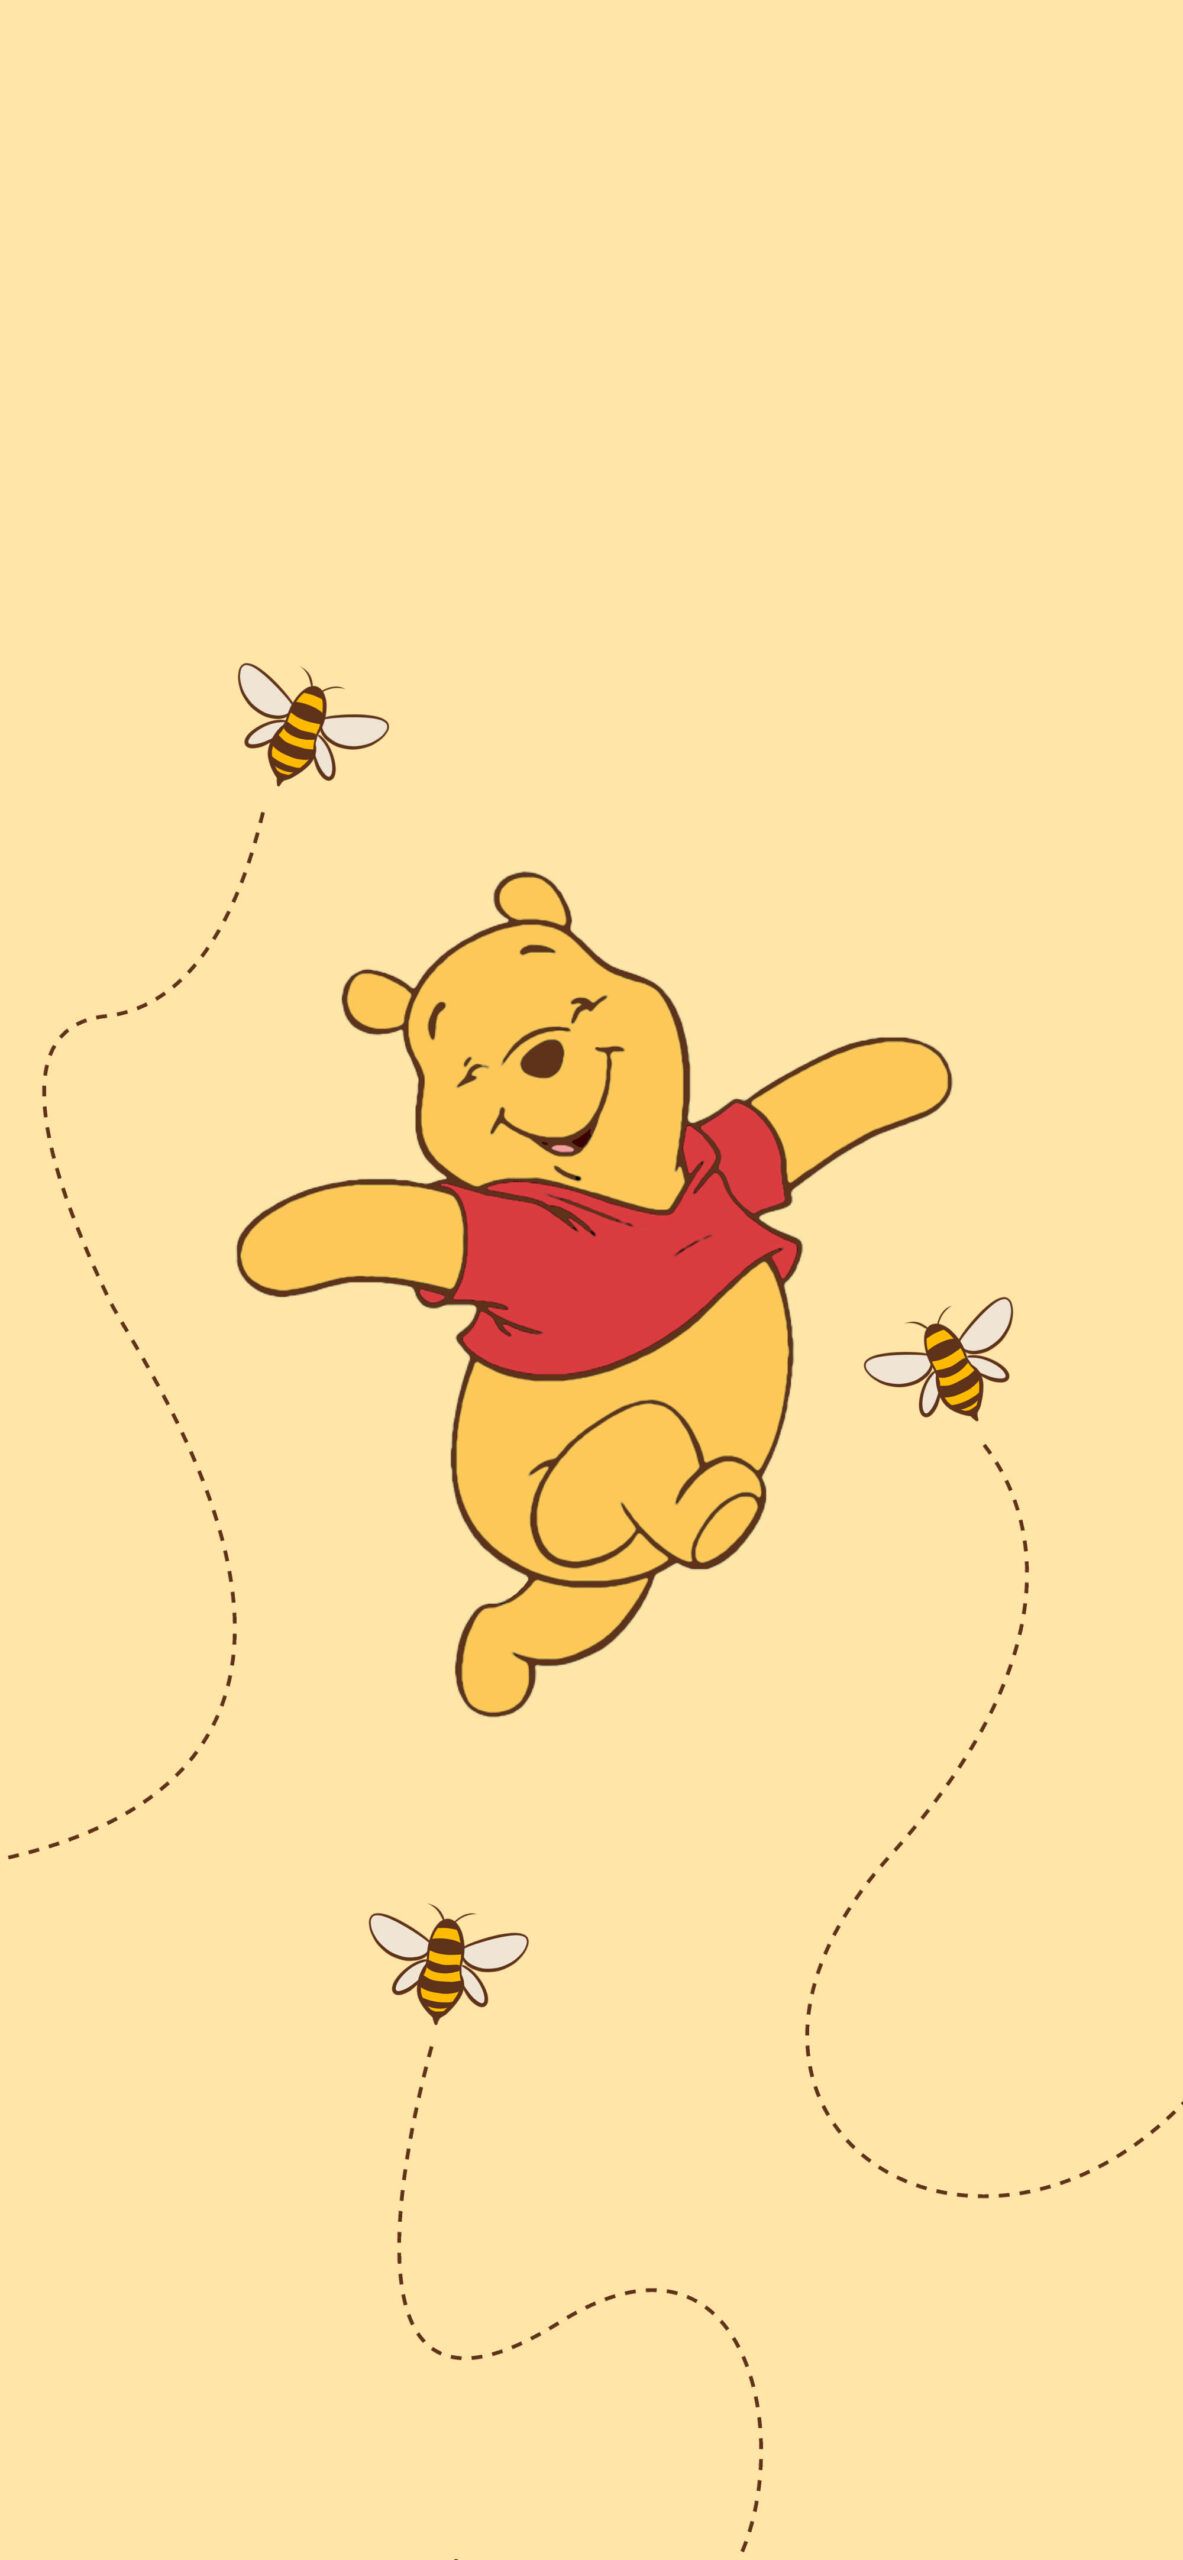 Winnie the Pooh Yellow Wallpaper the Pooh Wallpaper